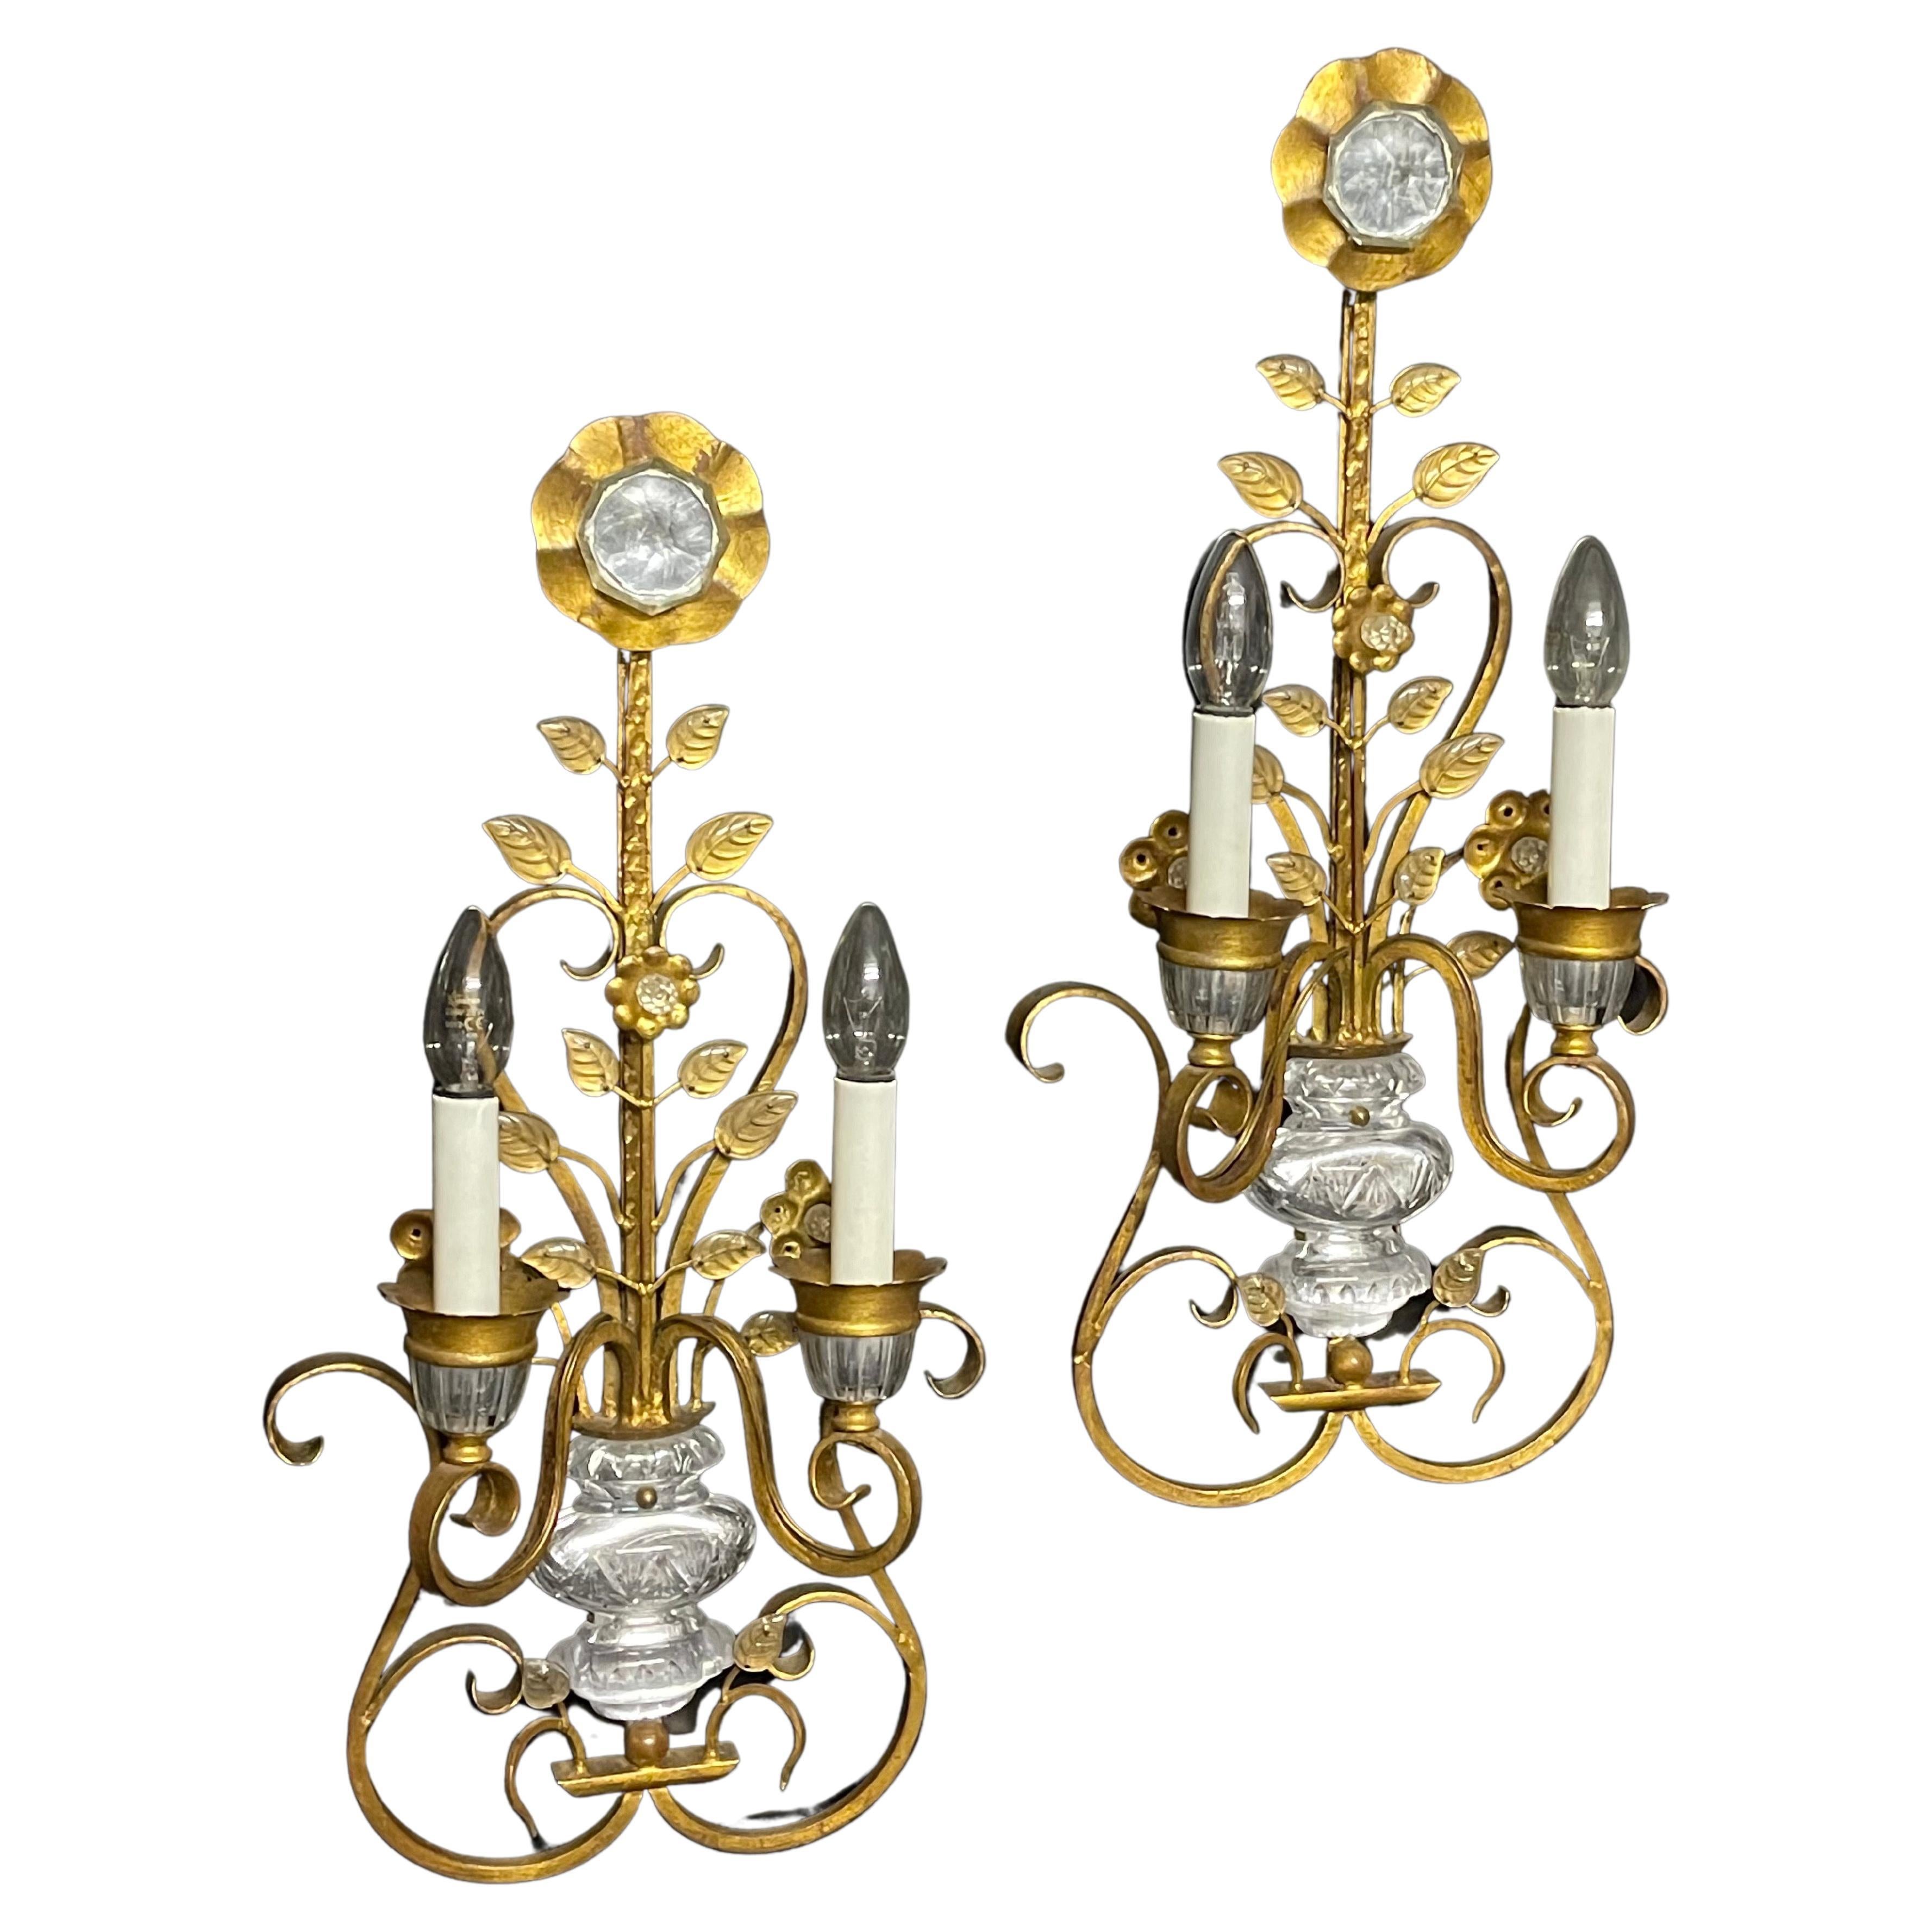 Pair of Large Italian Gilt Iron Wall Sconces by G.Banci, Italy, circa 1970s